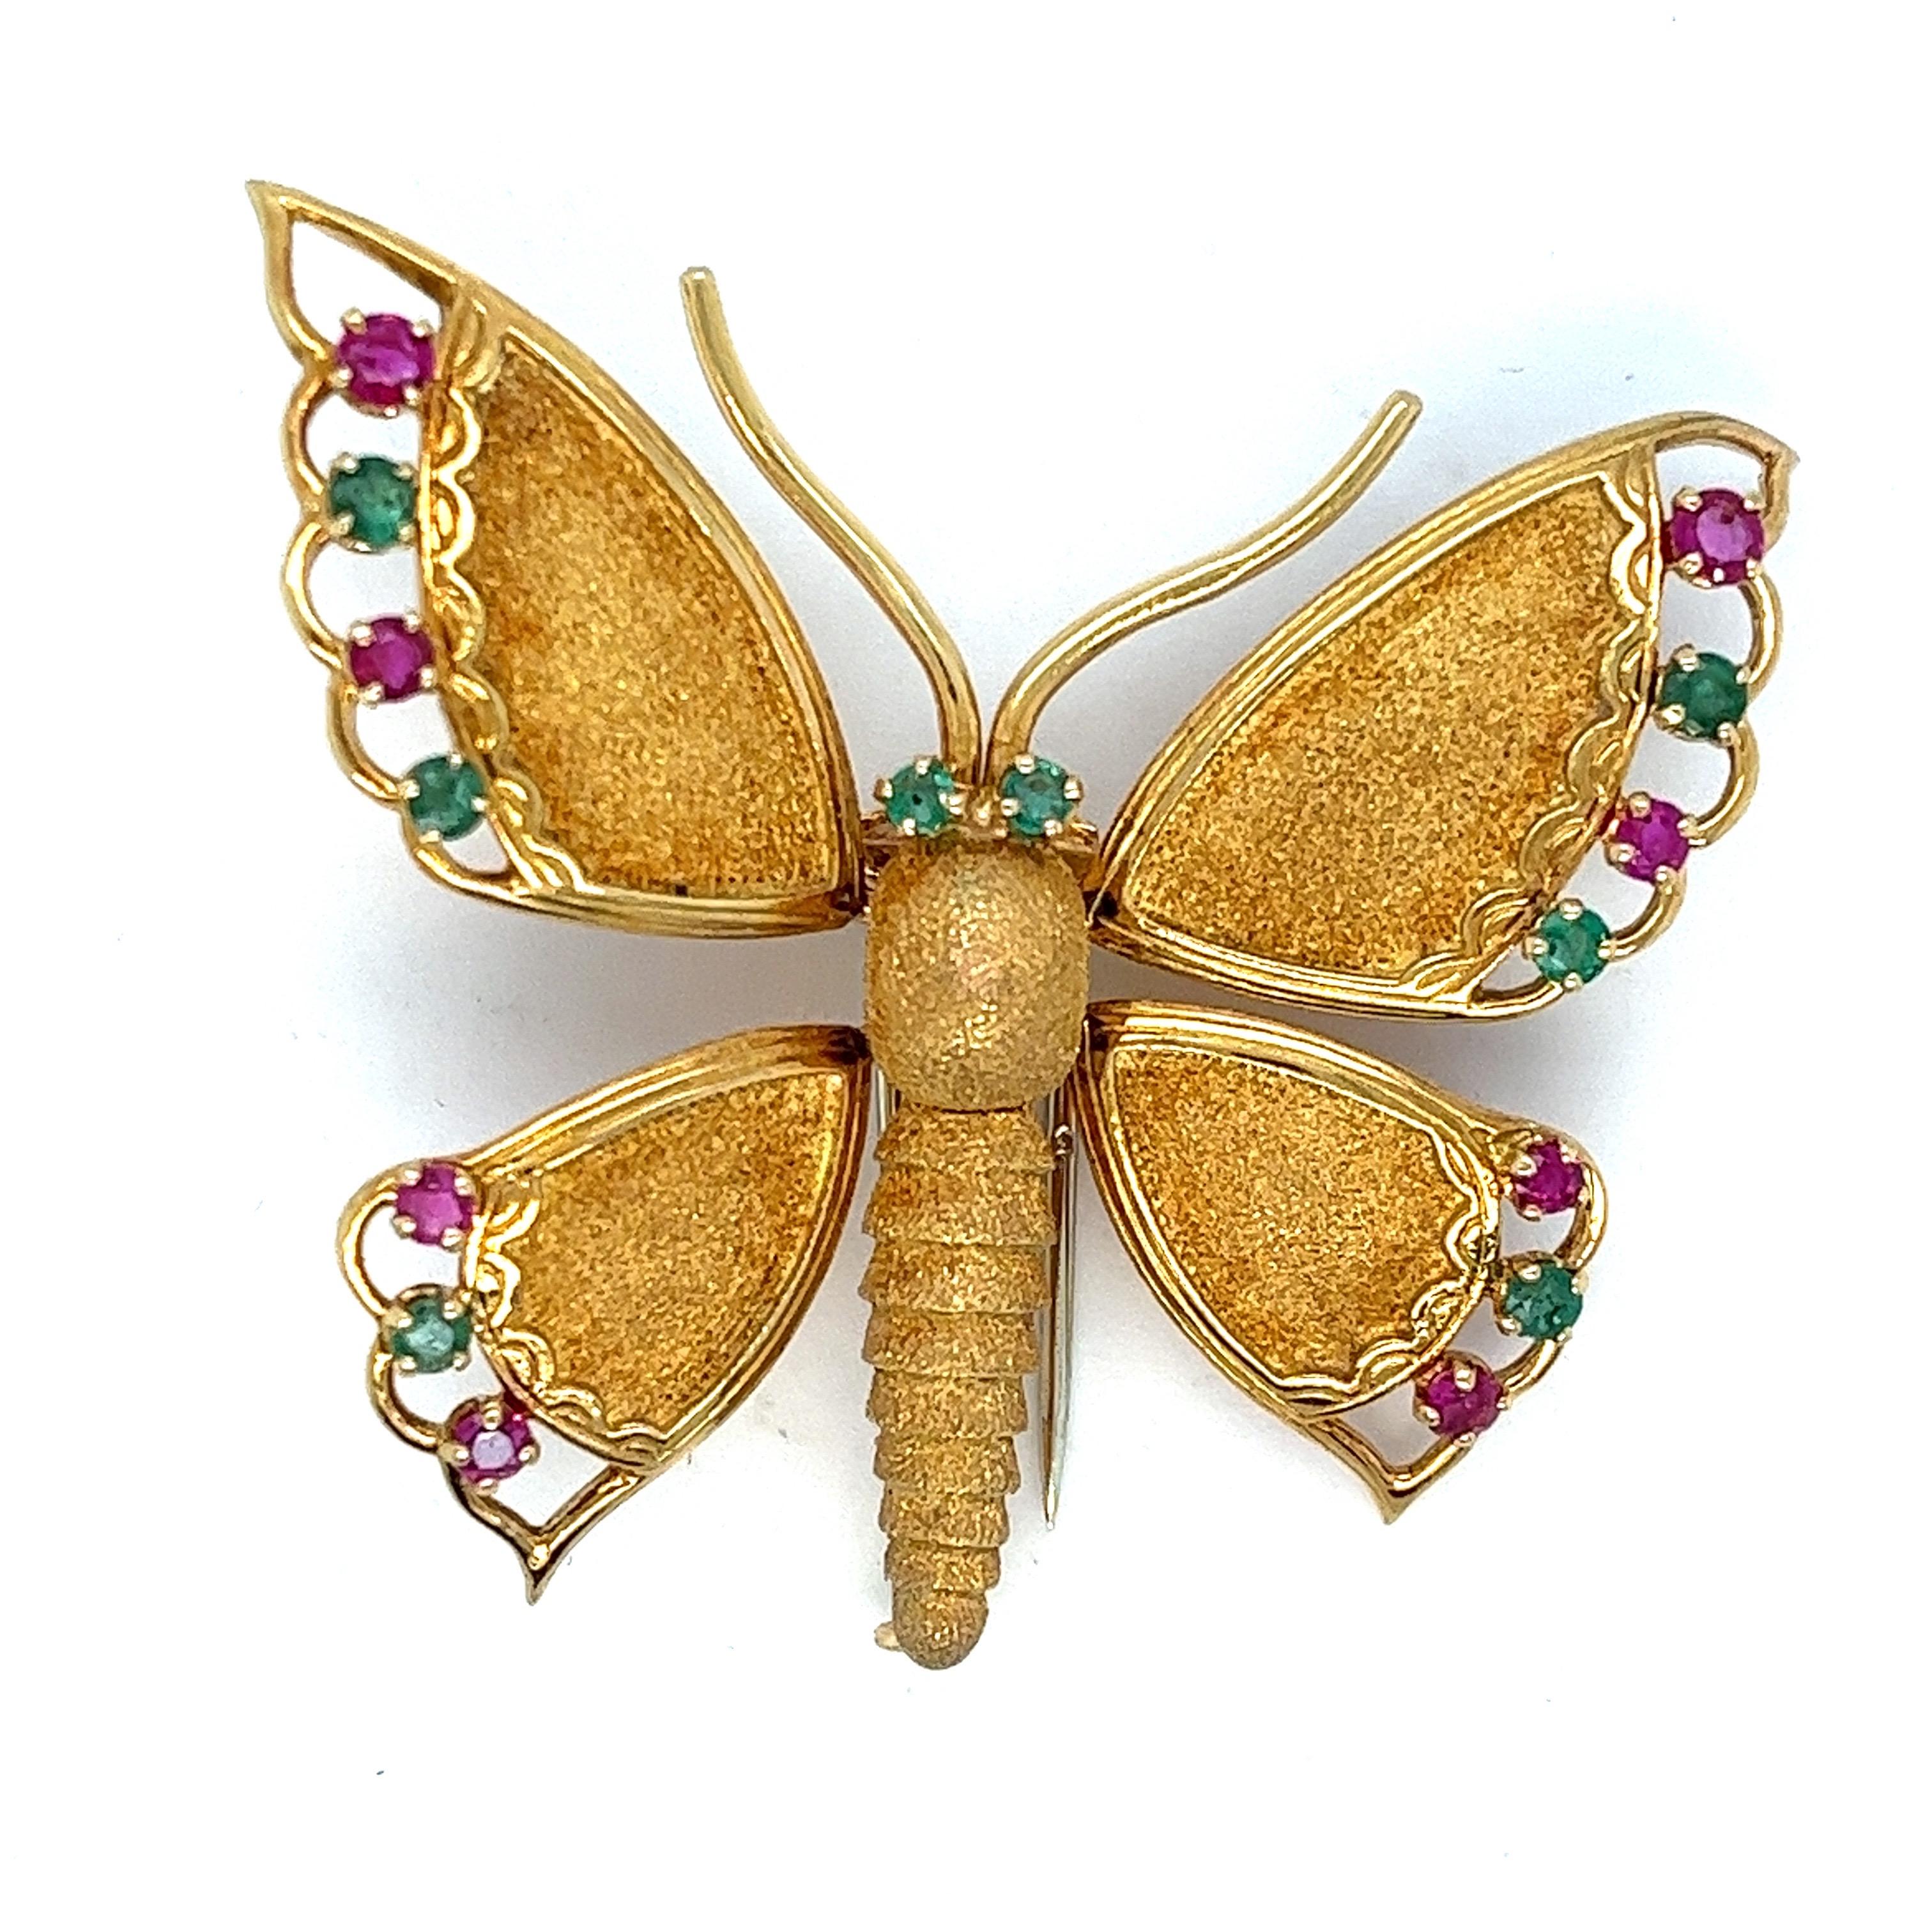 Exquisite FRED Paris Multi-Gem Butterfly Brooch - 18kt Solid Gold In Good Condition For Sale In Miami, FL